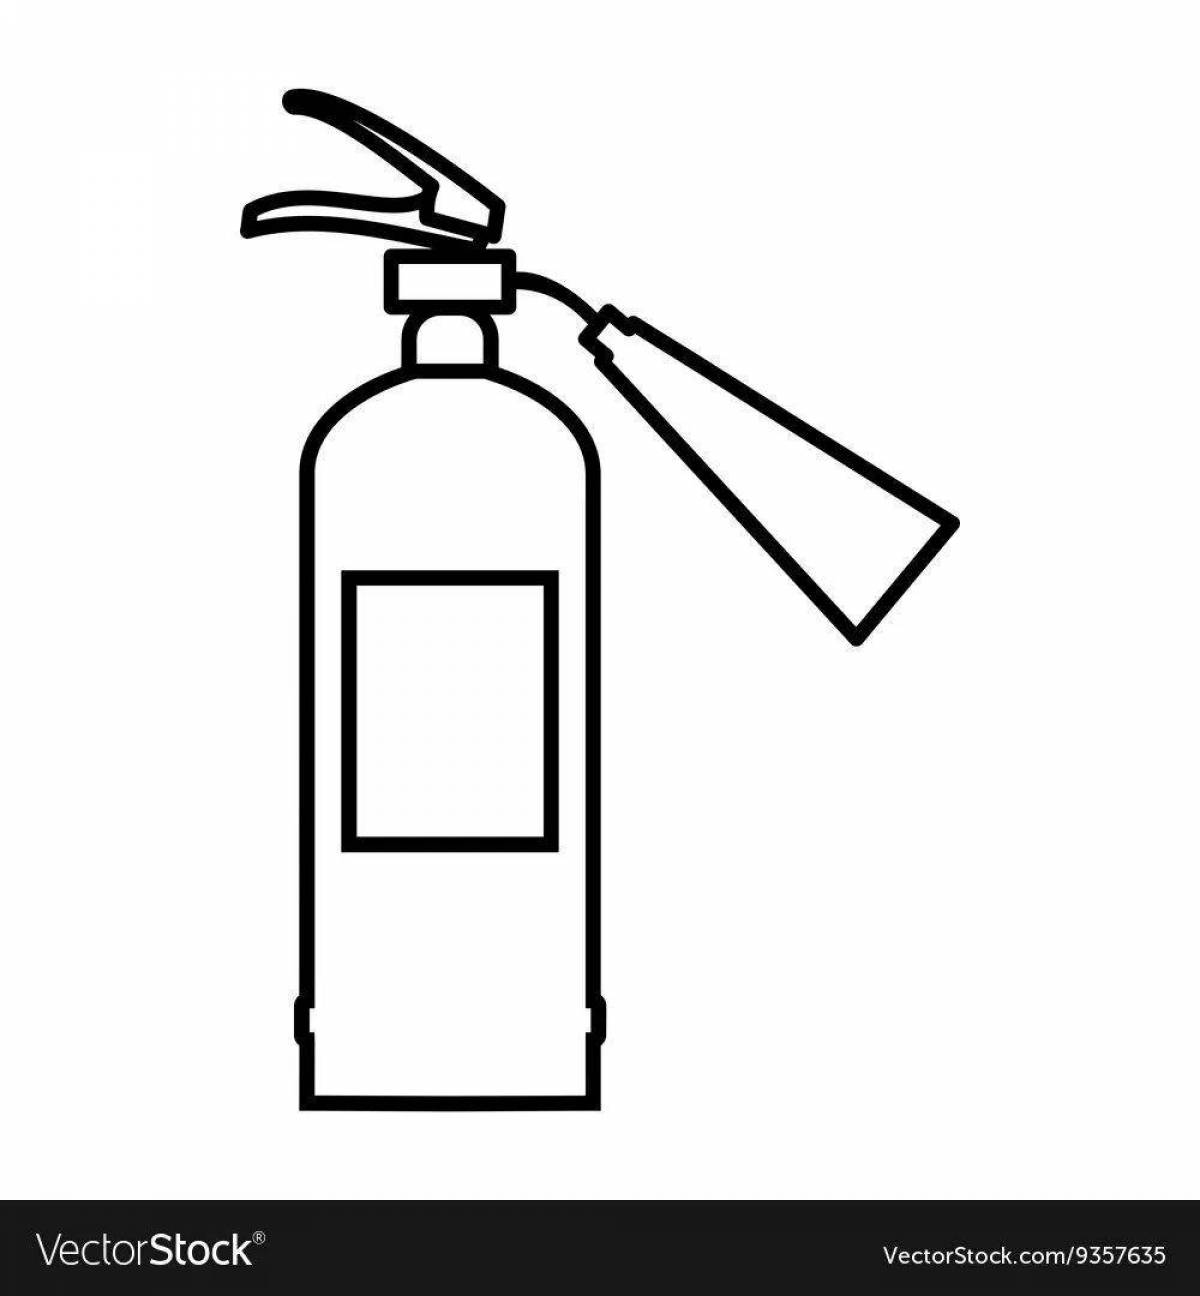 Coloring page with fire extinguisher for kids